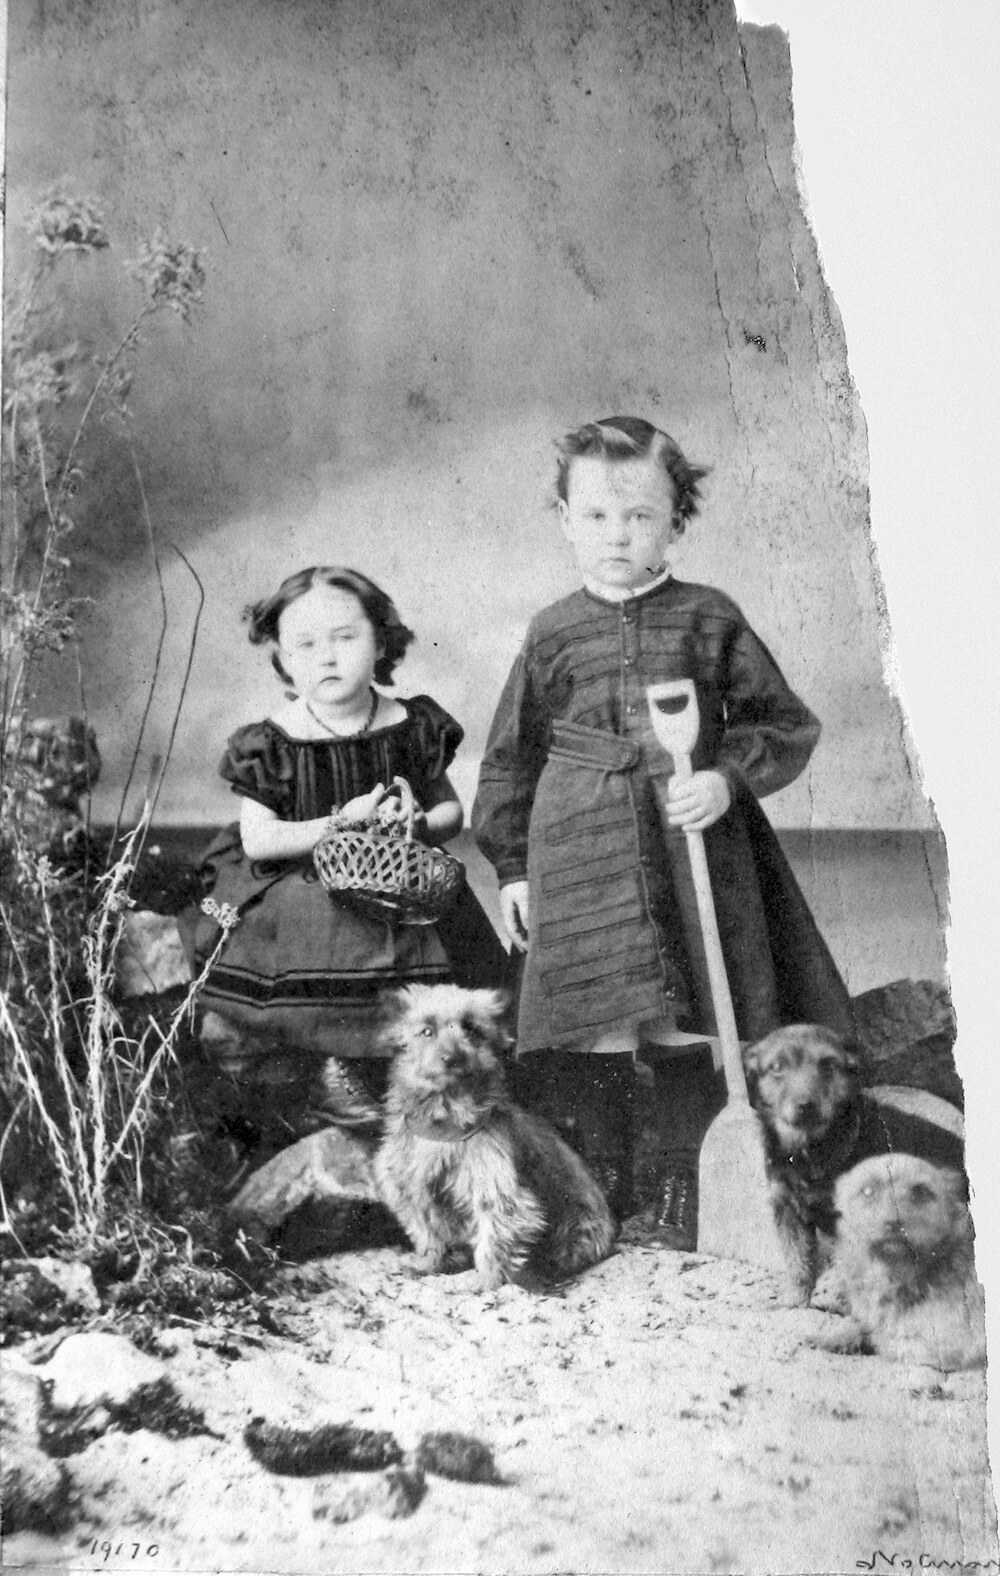 1865 - Master and Missie Laflamme and dogs, Montreal